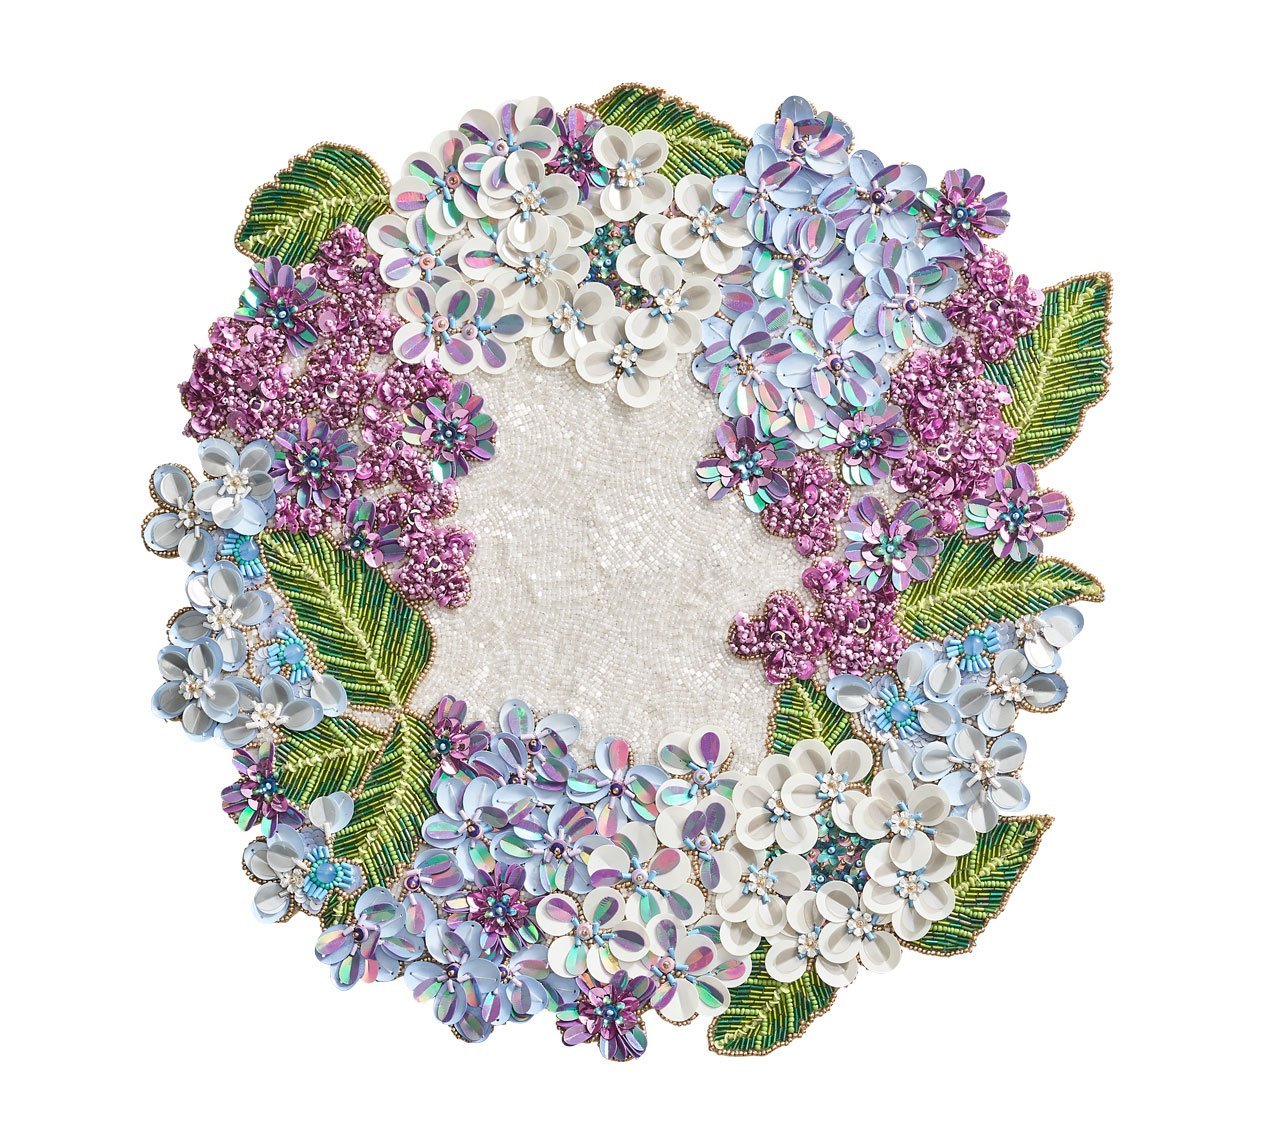 Hydrangea Placemat with beaded florals in purple, white, and blue